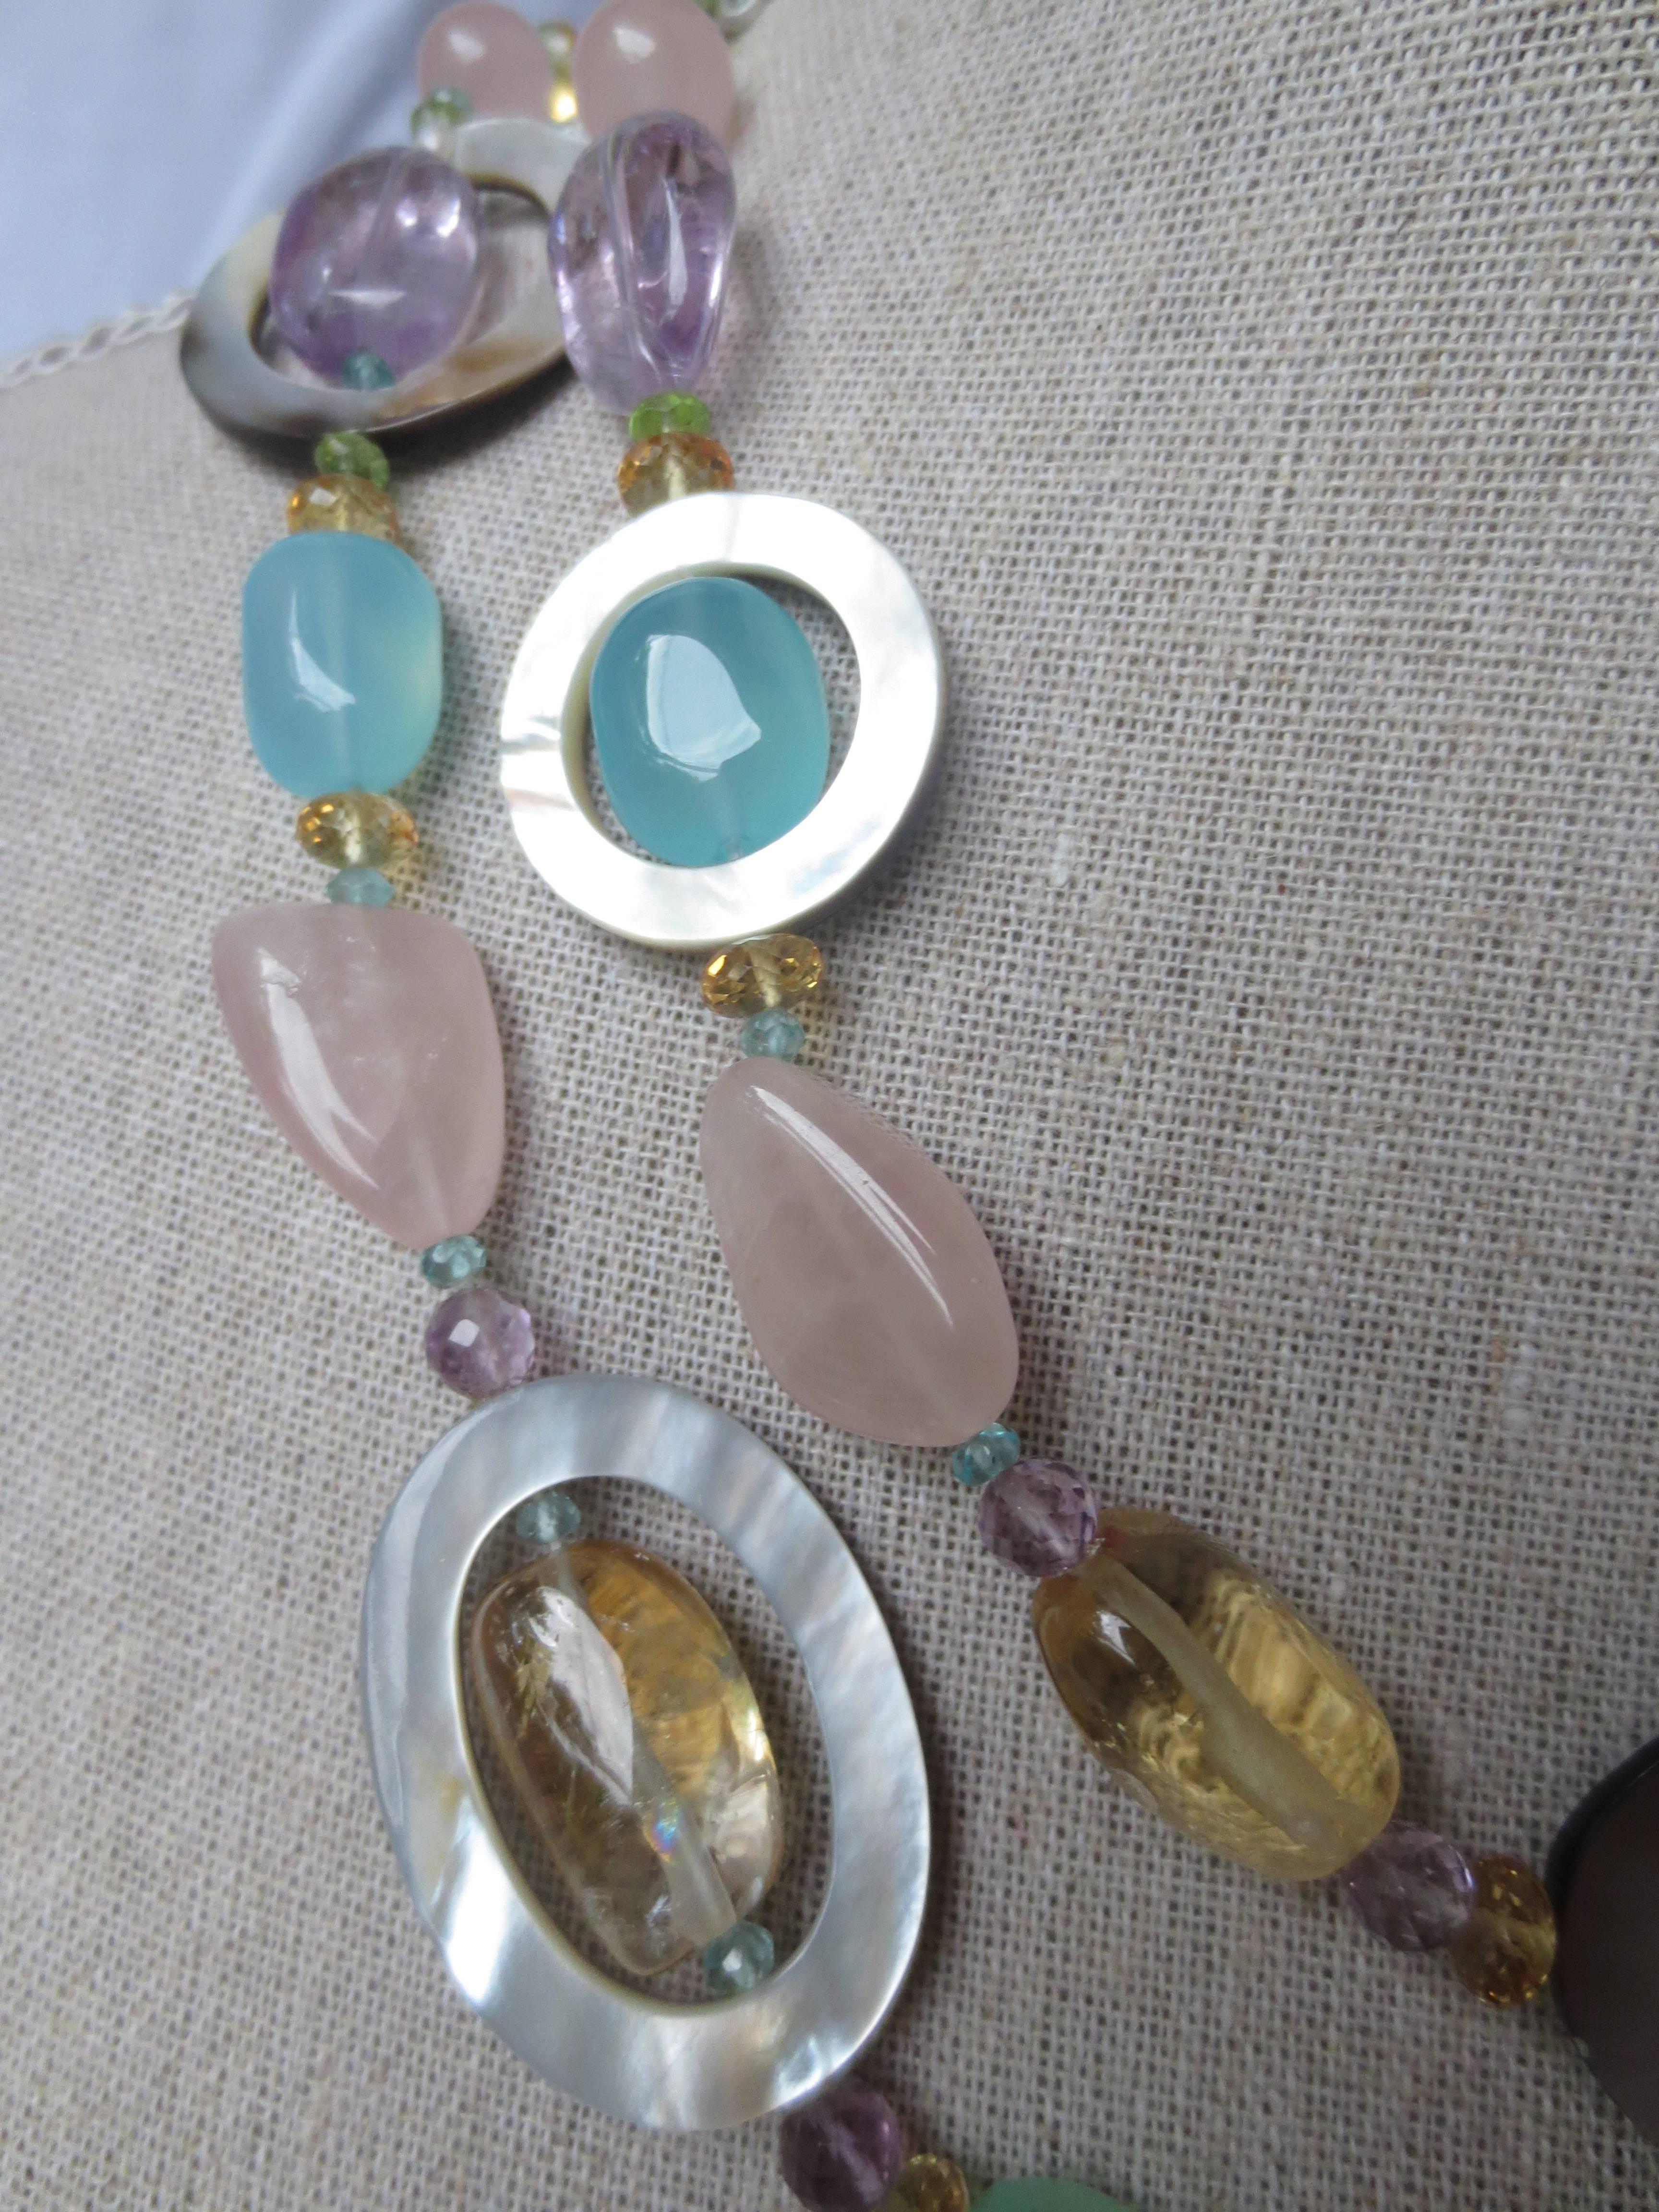  Amethyst, Citrine, Aquamarine, Peridot, Calcedony, Rose Quartz, and Fluorite beads are combined to create a gorgeous shimmering piece. The semiprecious stones highlight the luster and iridescence of the mother-of-pearl oval and round rings,